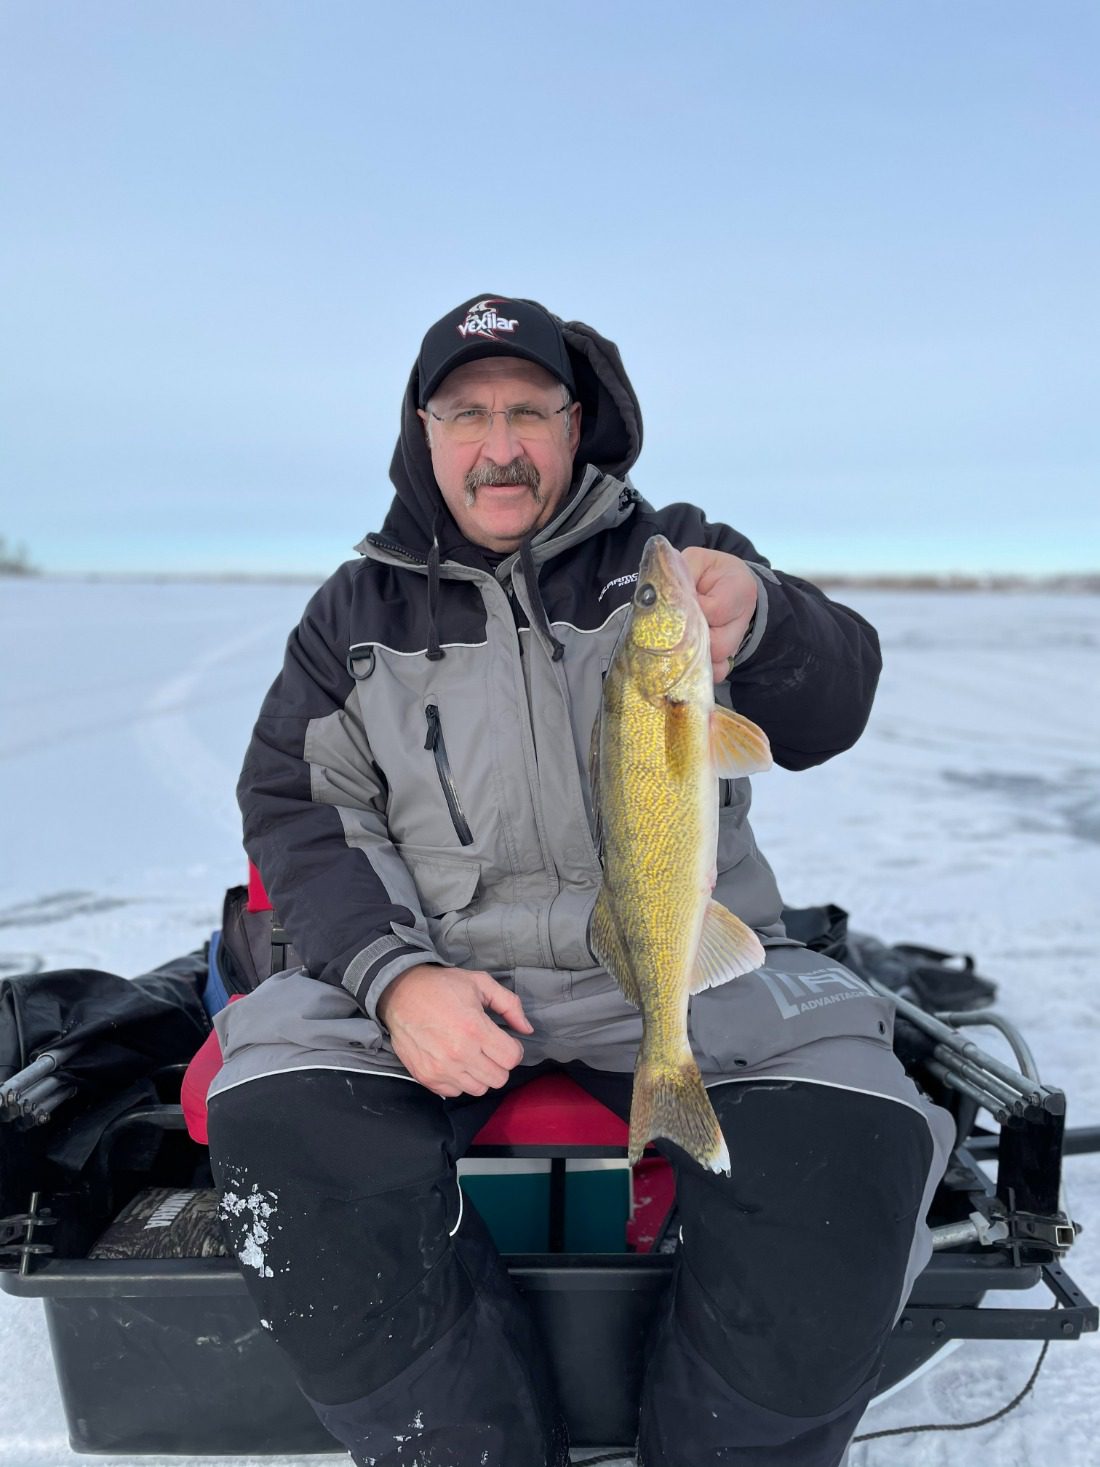 Basic Ice Fishing Tips to Catch More Fish - Northland Fishing Tackle